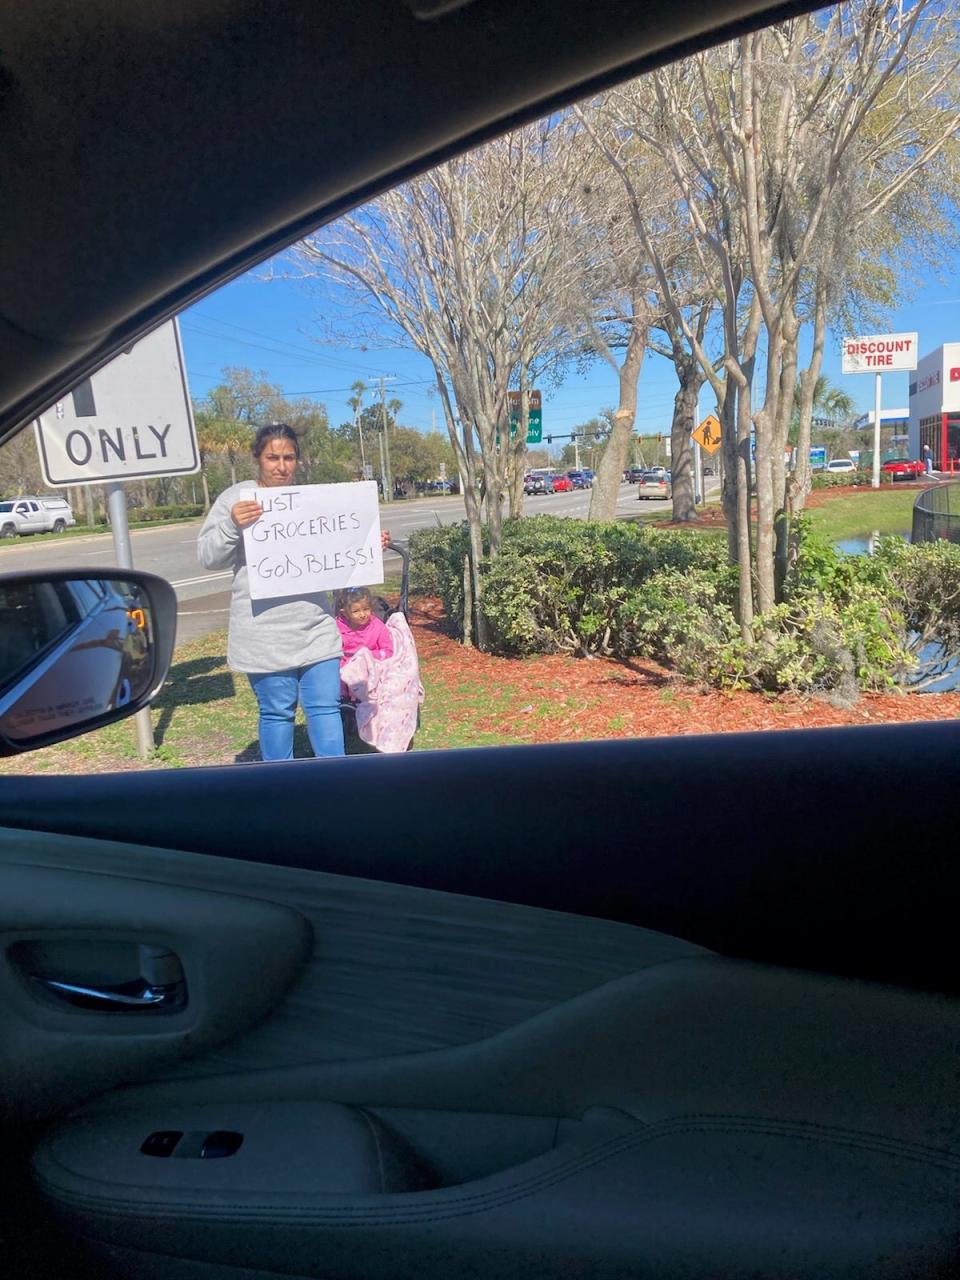 A woman with a small child spent some time one day last week on Beville Road west of Nova Road trying to get the attention of passing motorists. The woman was appealing for help with groceries.